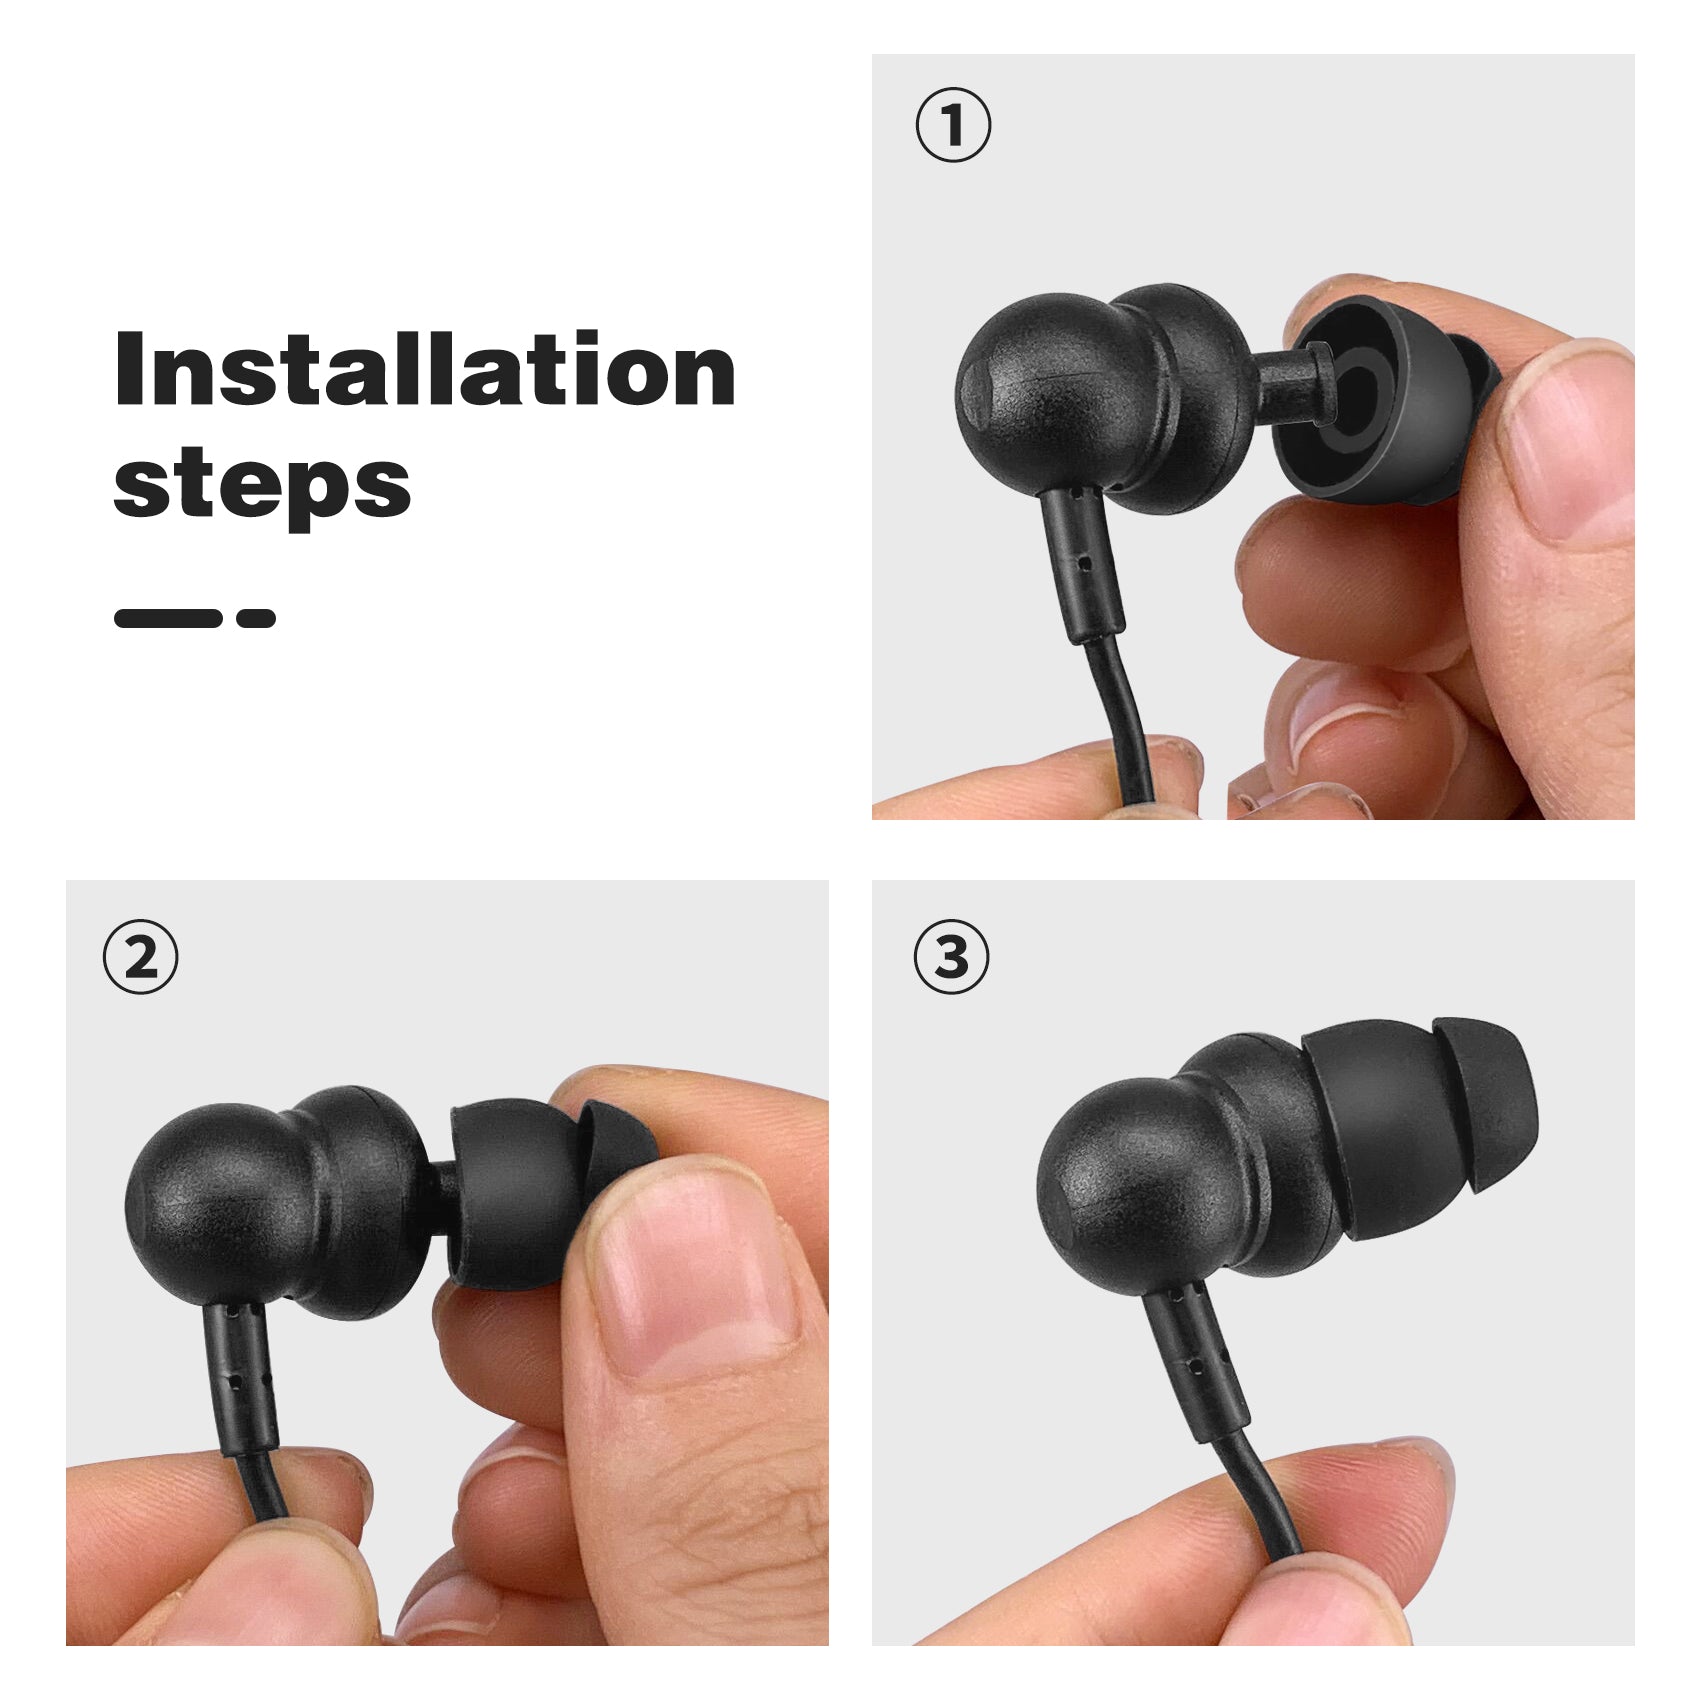 Simolio Headset Replacement Silicone Ear Tips Installation Way